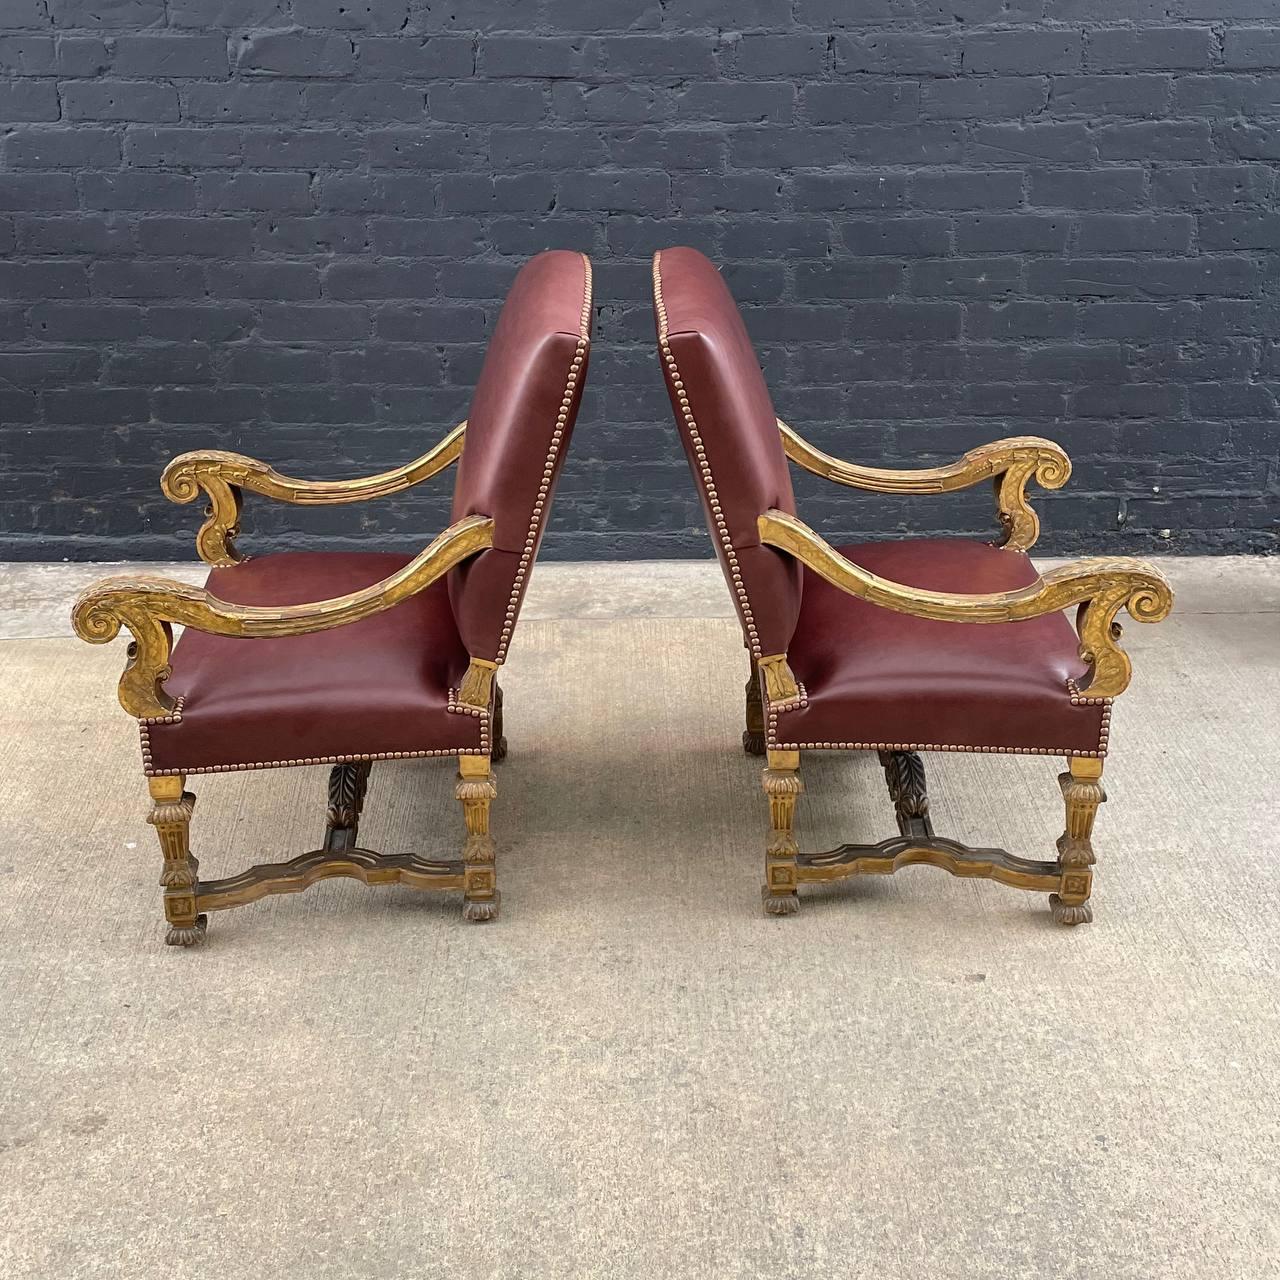 American Antique French Louis XVI Gold-Leaf Gilded Carved Wood & Cognac Leather Armchair For Sale